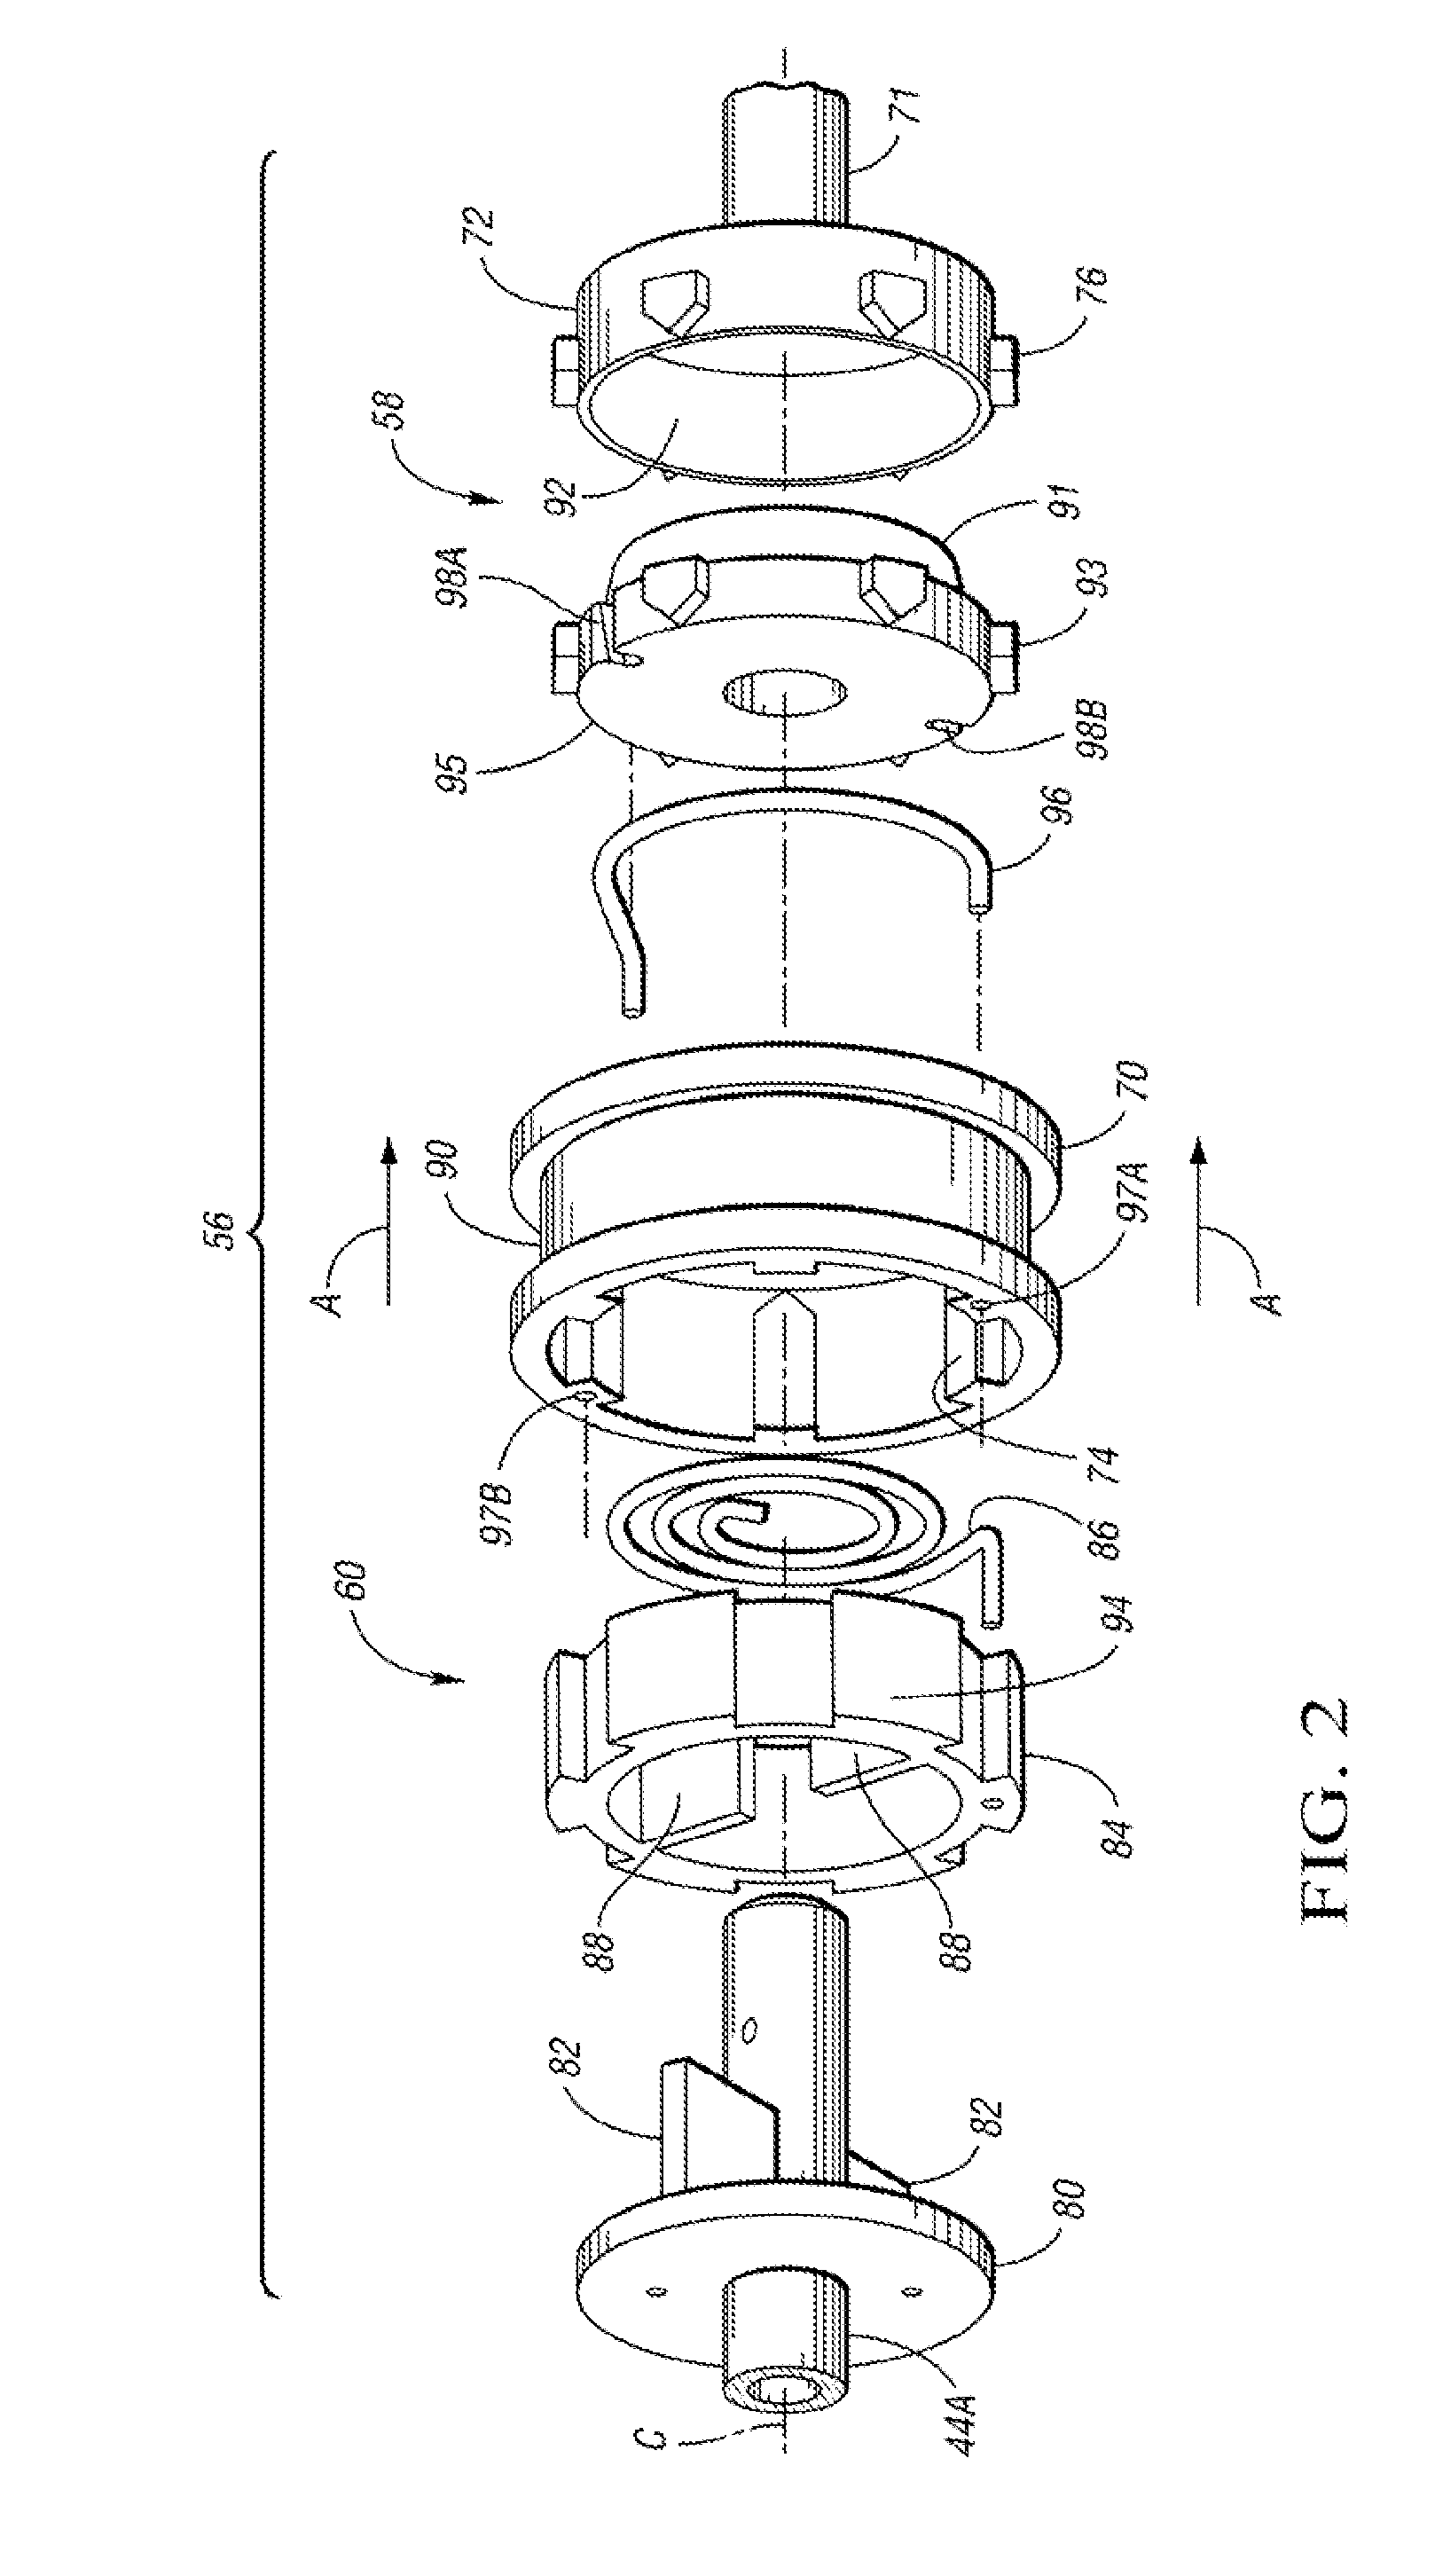 Torque-transmitting assembly with dog clutch and hydrostatic damper and electrically variable transmission with same